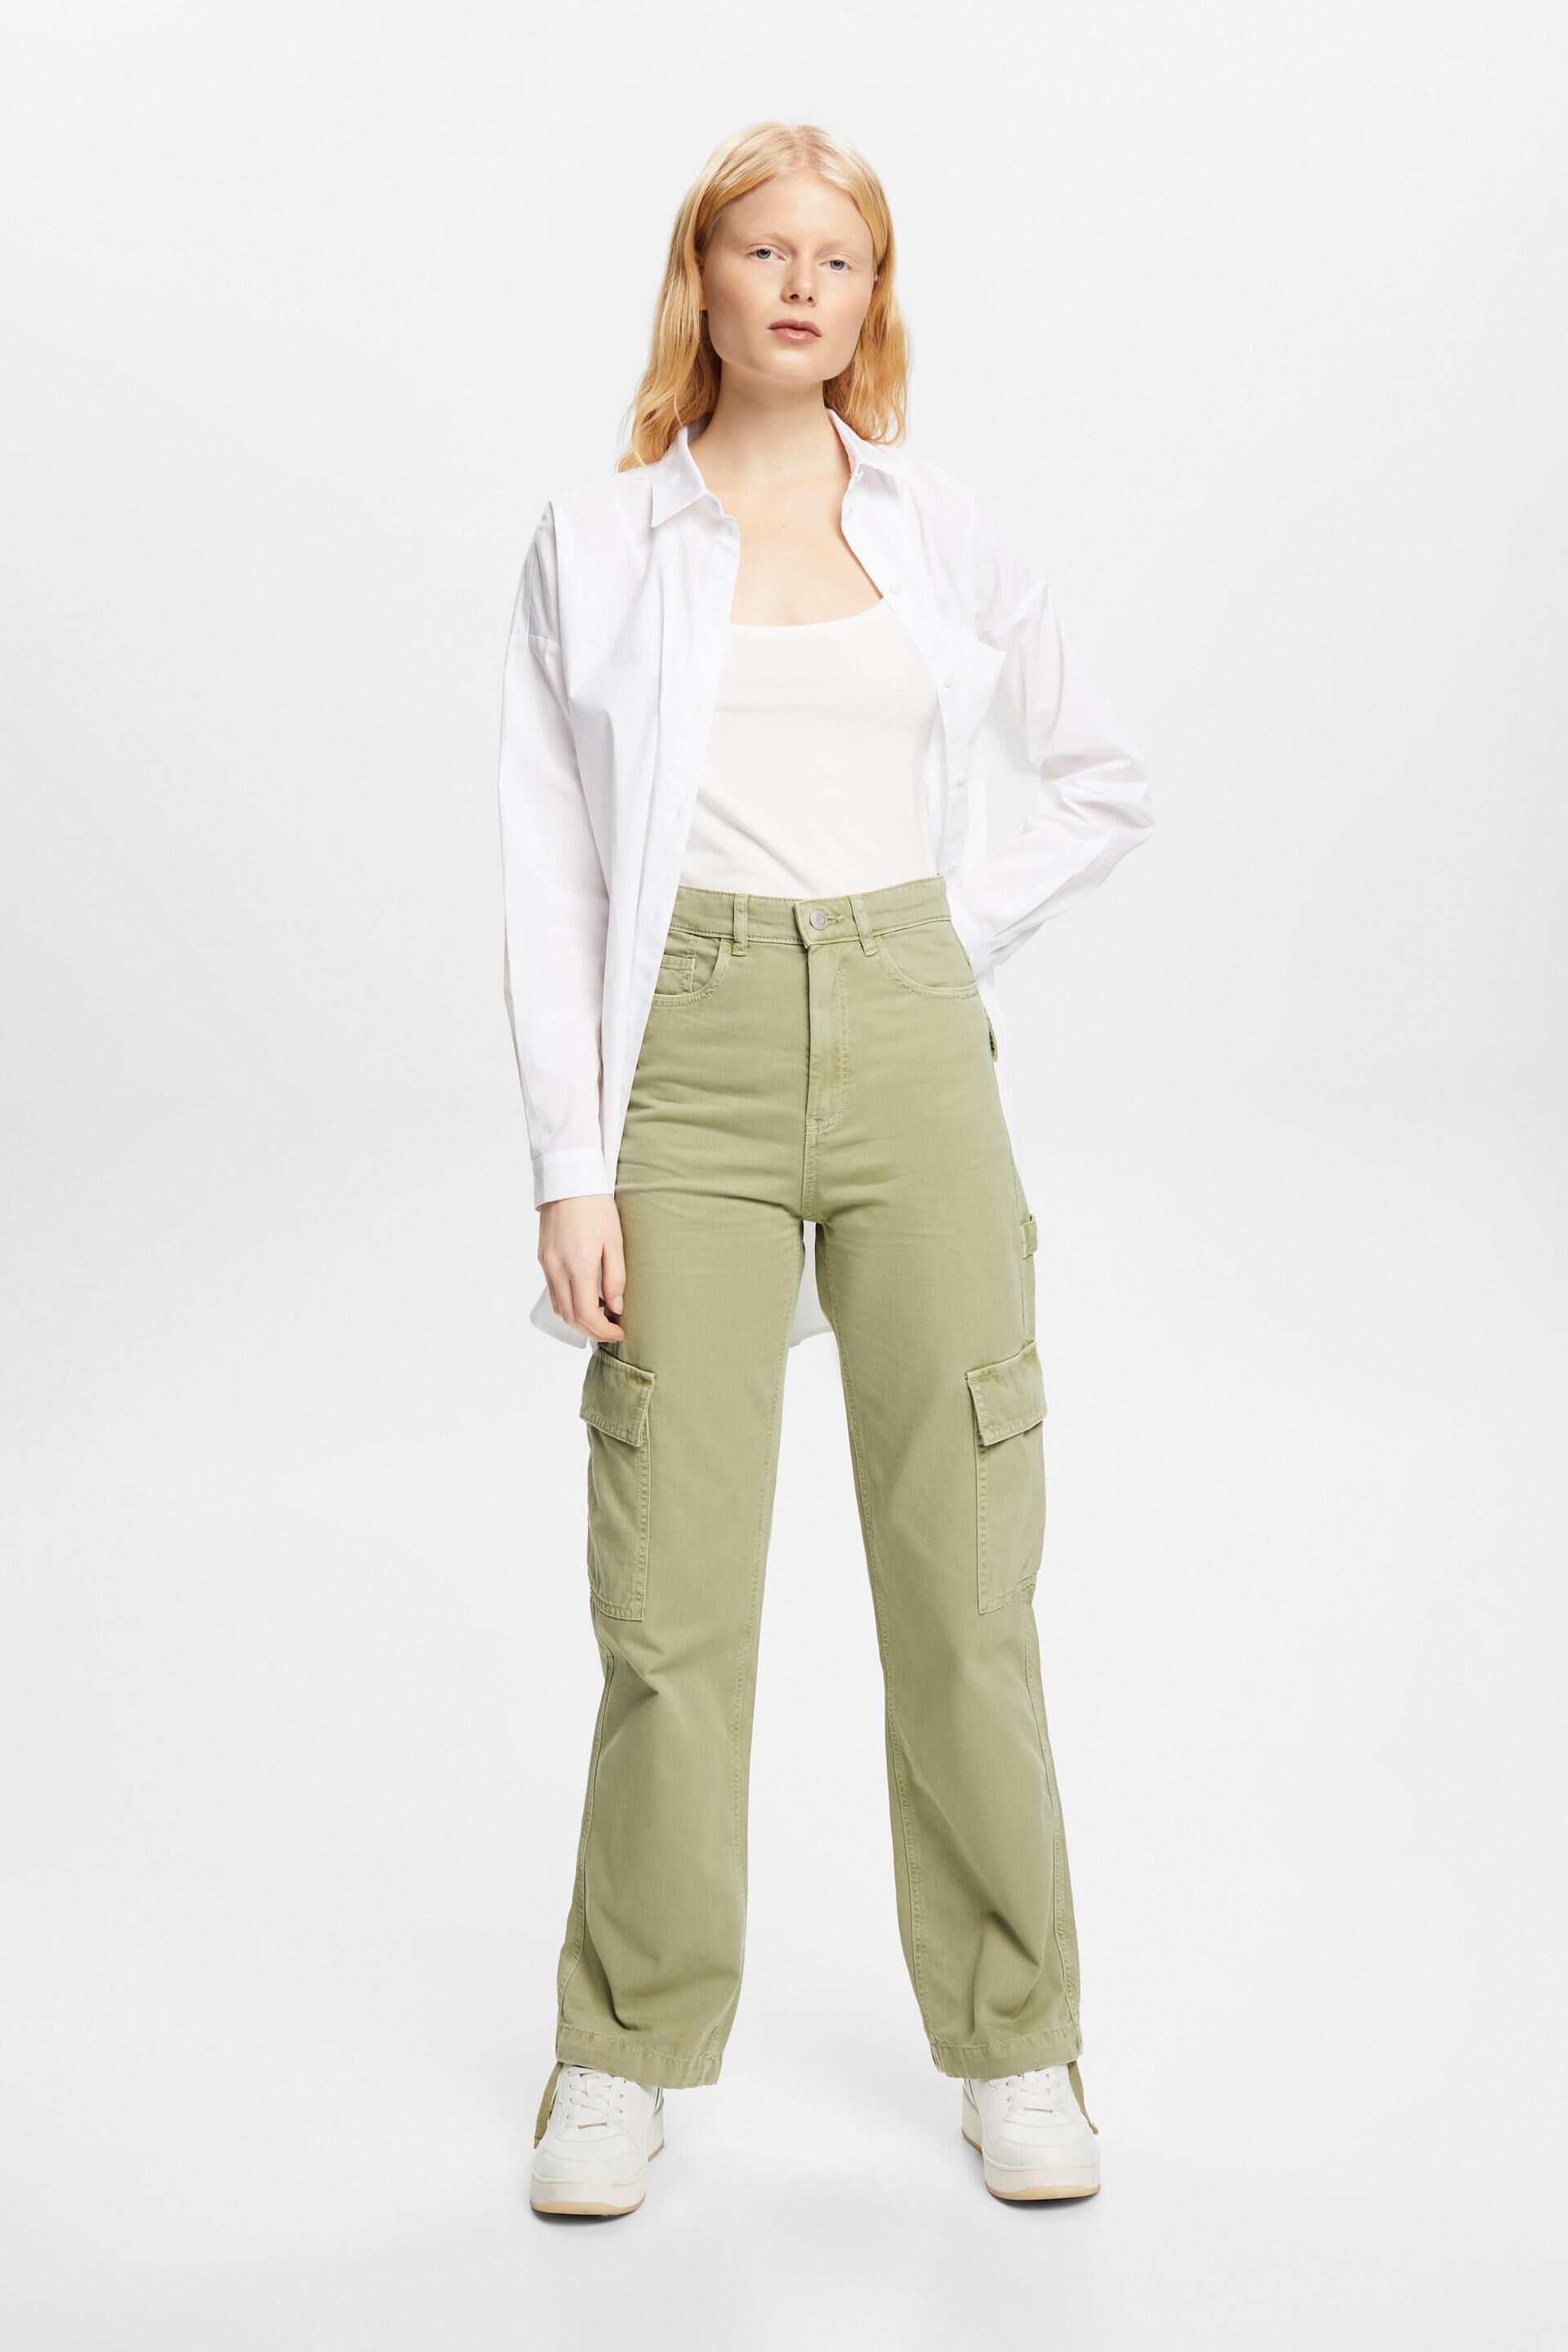 Buy TNA Army Printed Women Regular Length Solid Cargo Trousers (Green) at  Amazon.in